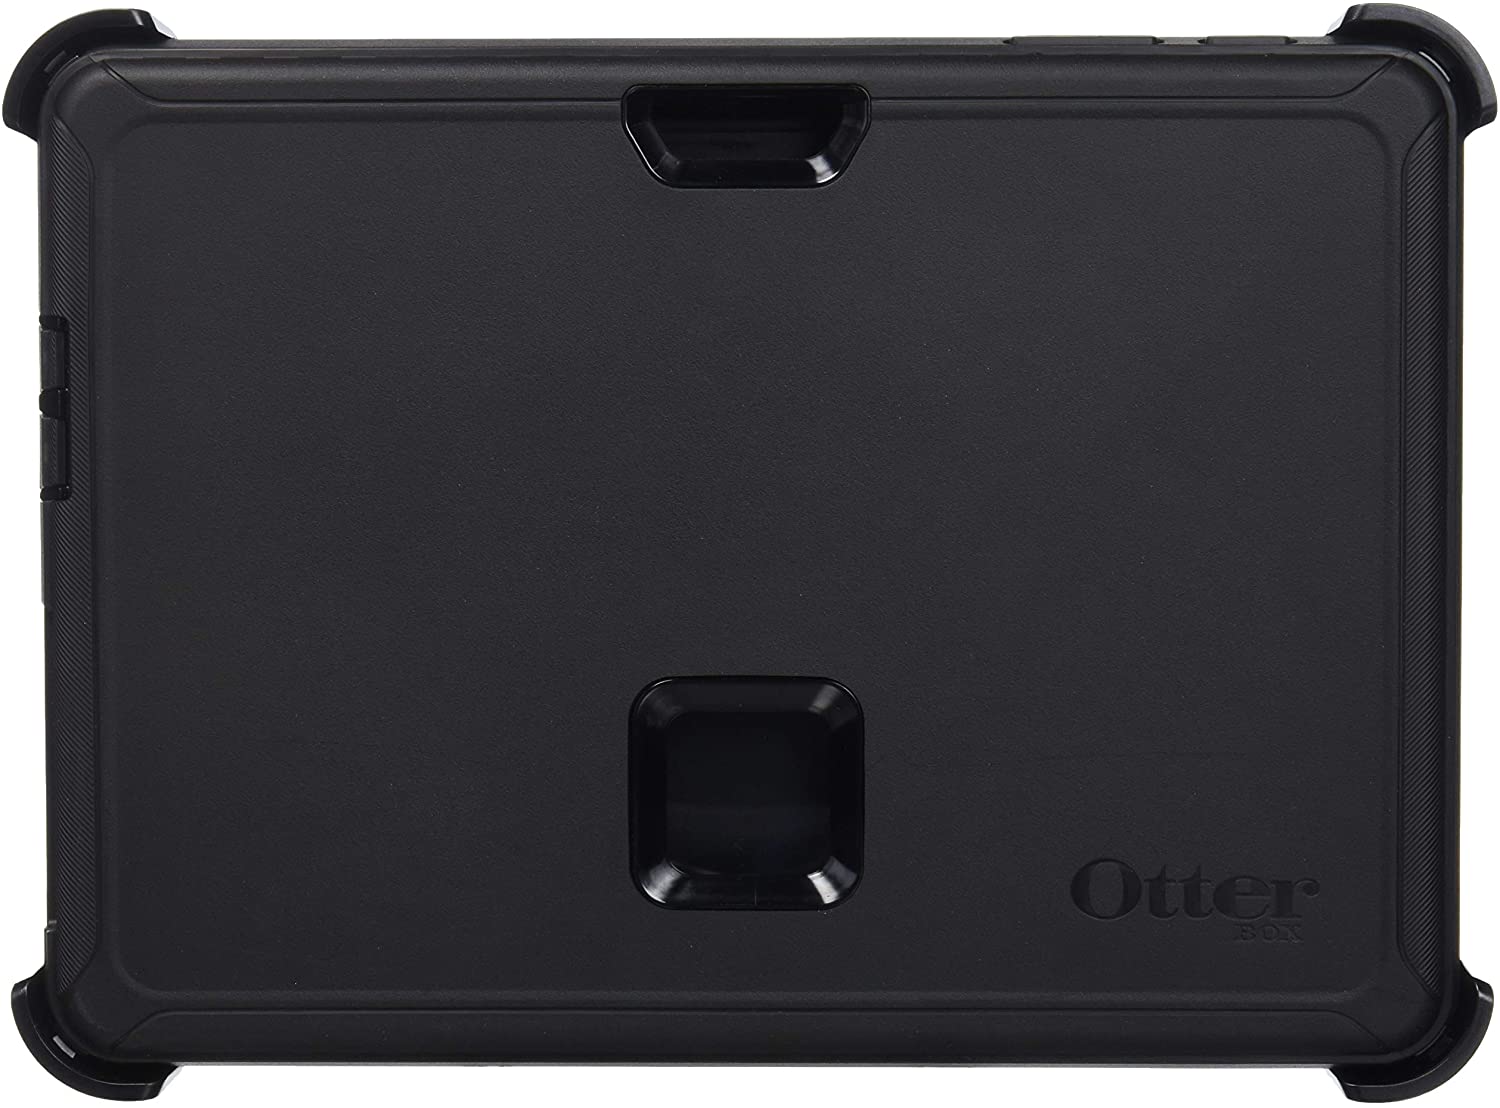 OtterBox DEFENDER SERIES Case for Microsoft Surface Go 2 - Black (New)